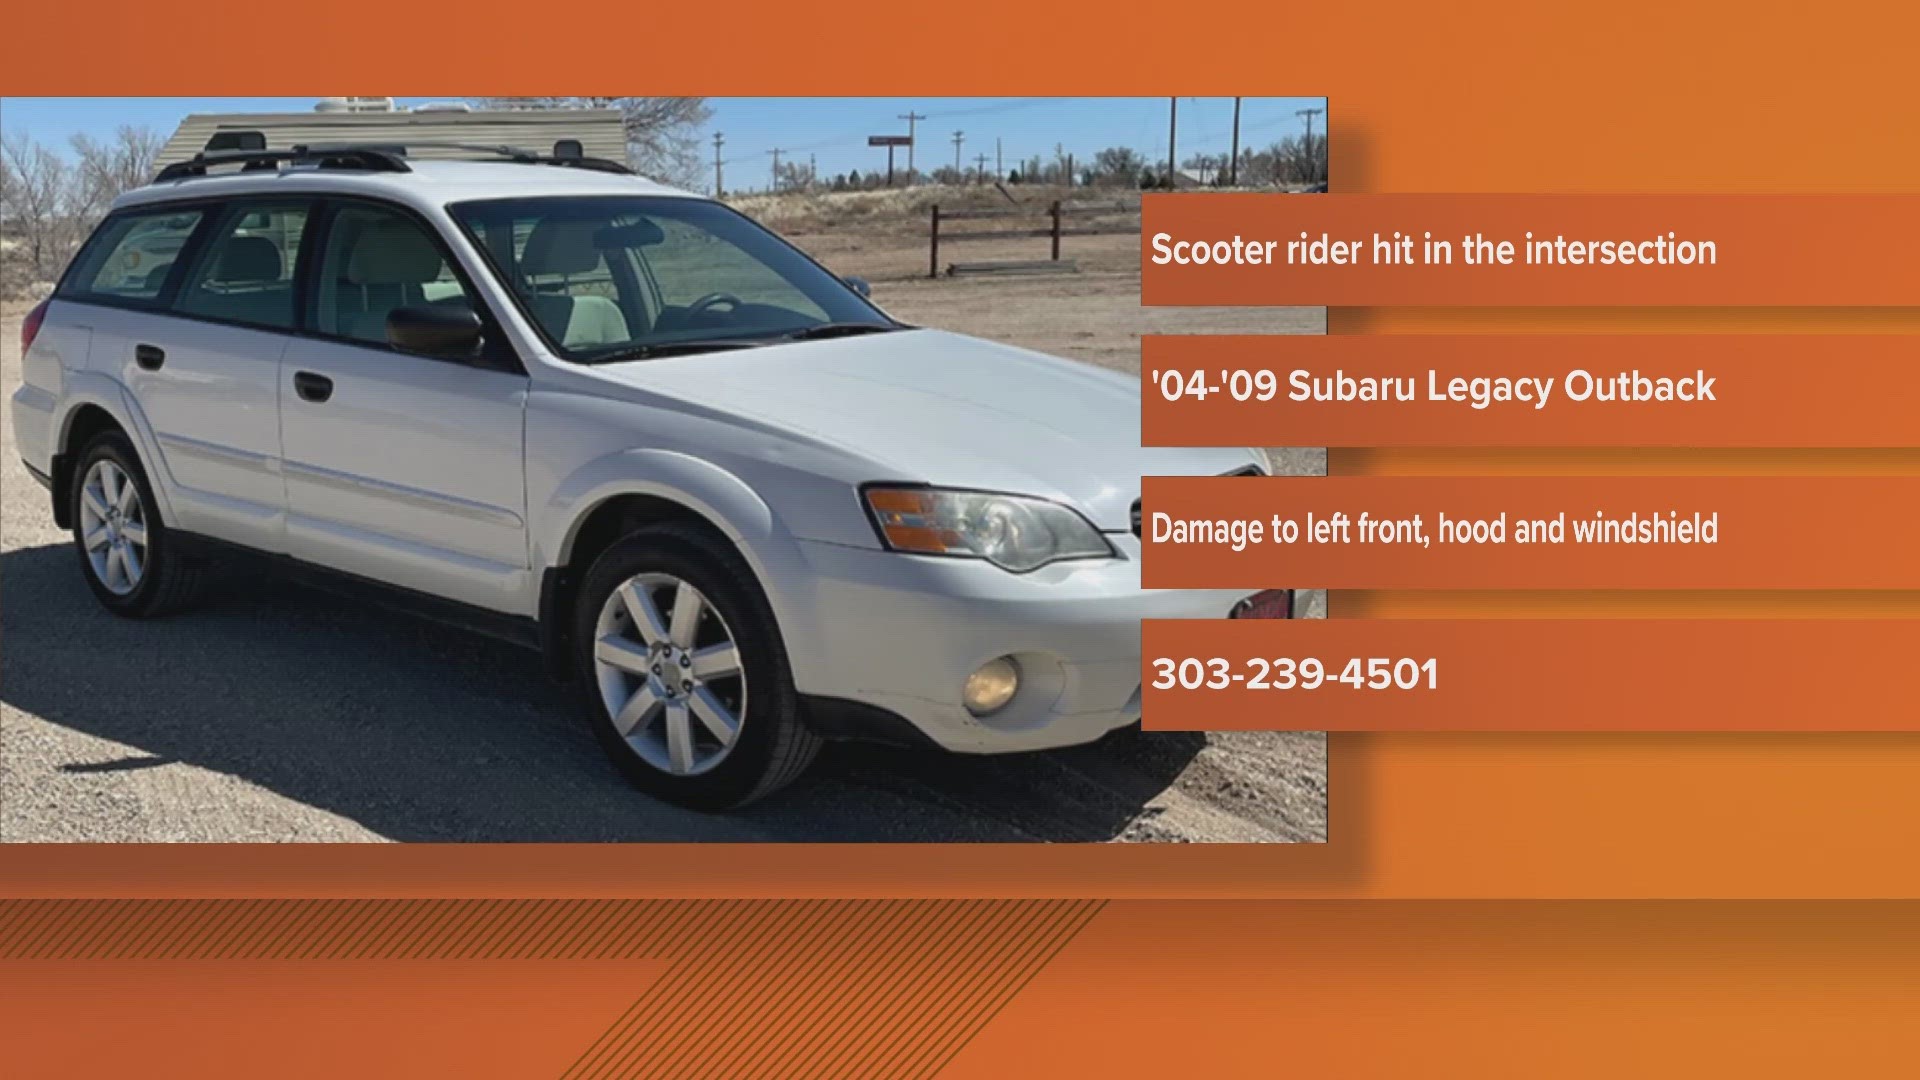 The crash happened on Dec. 21, 2023 in Adams County. Troopers are looking for a white 2004-2009 Subaru Outback.